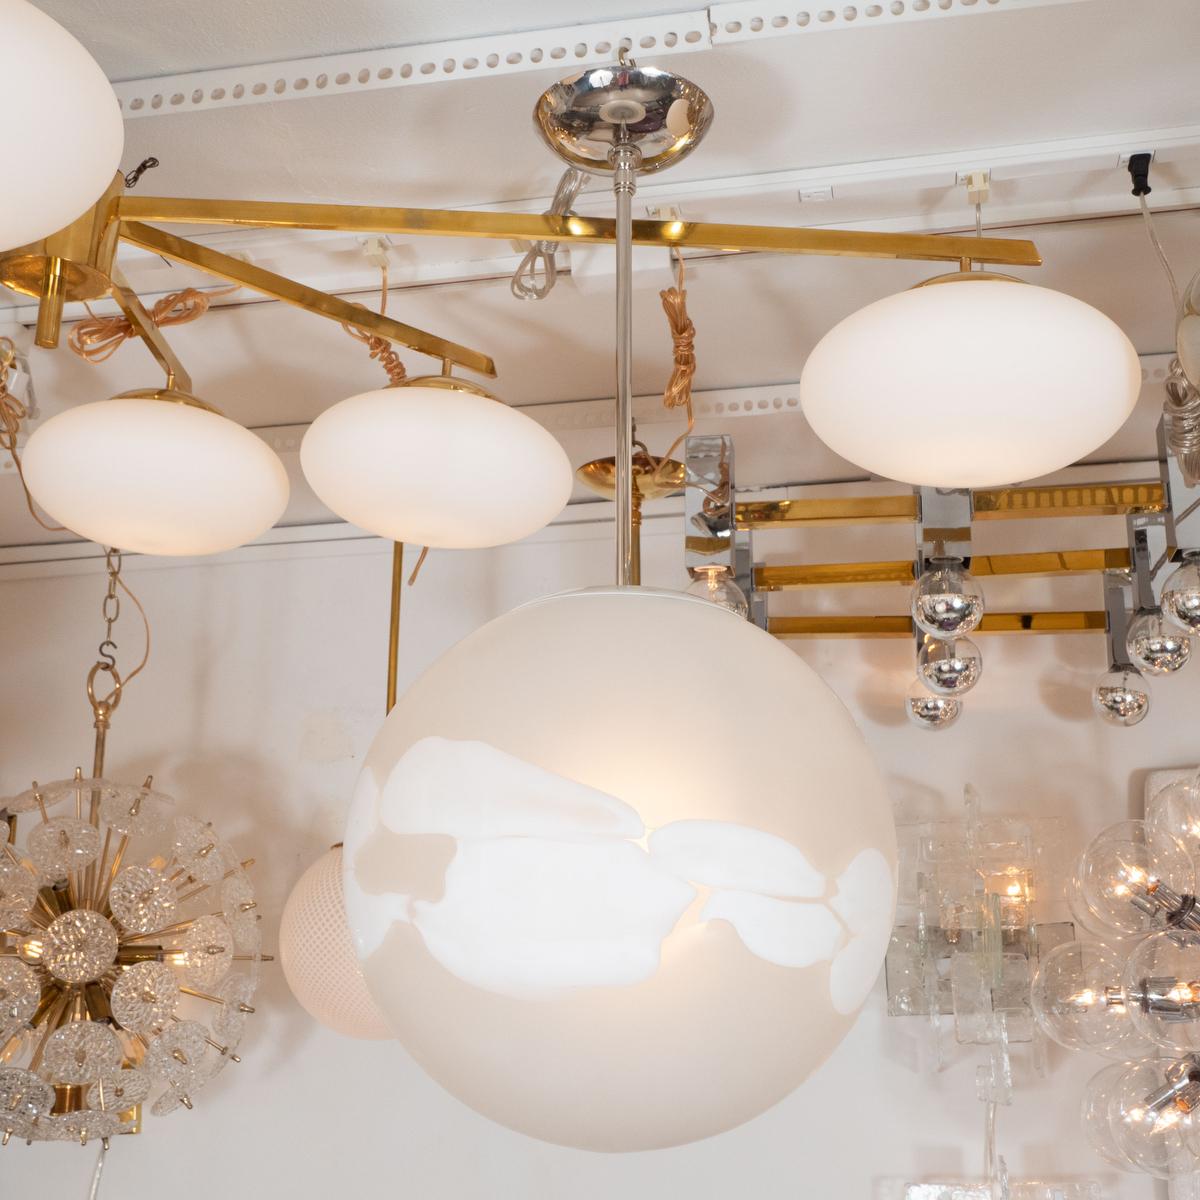 Spherical frosted glass pendant ceiling fixture with white lattimo details.